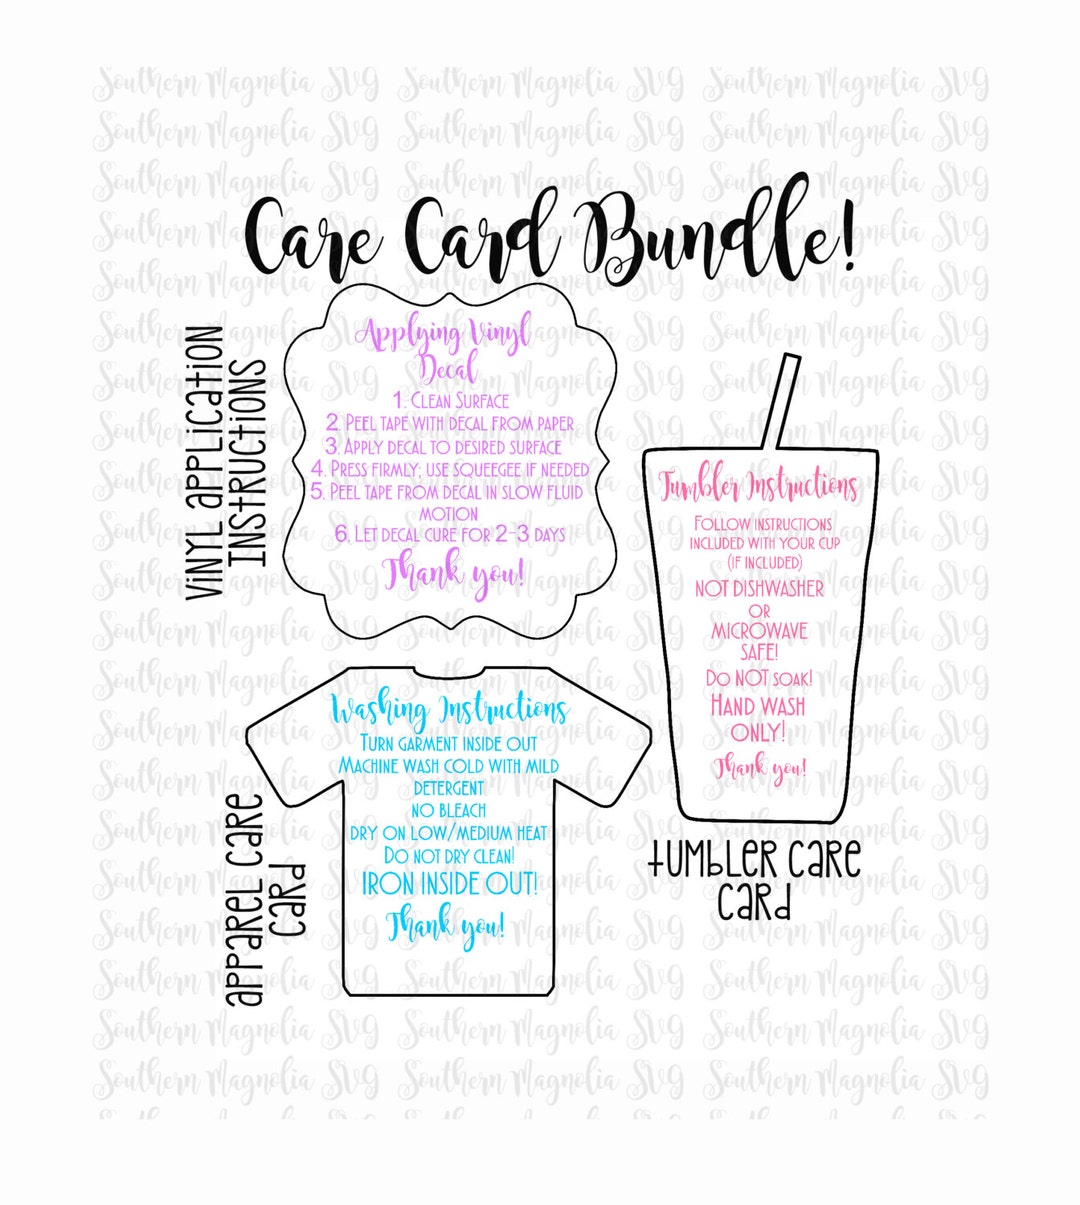 care-card-instructions-bundle-apply-vinyl-decal-print-and-etsy